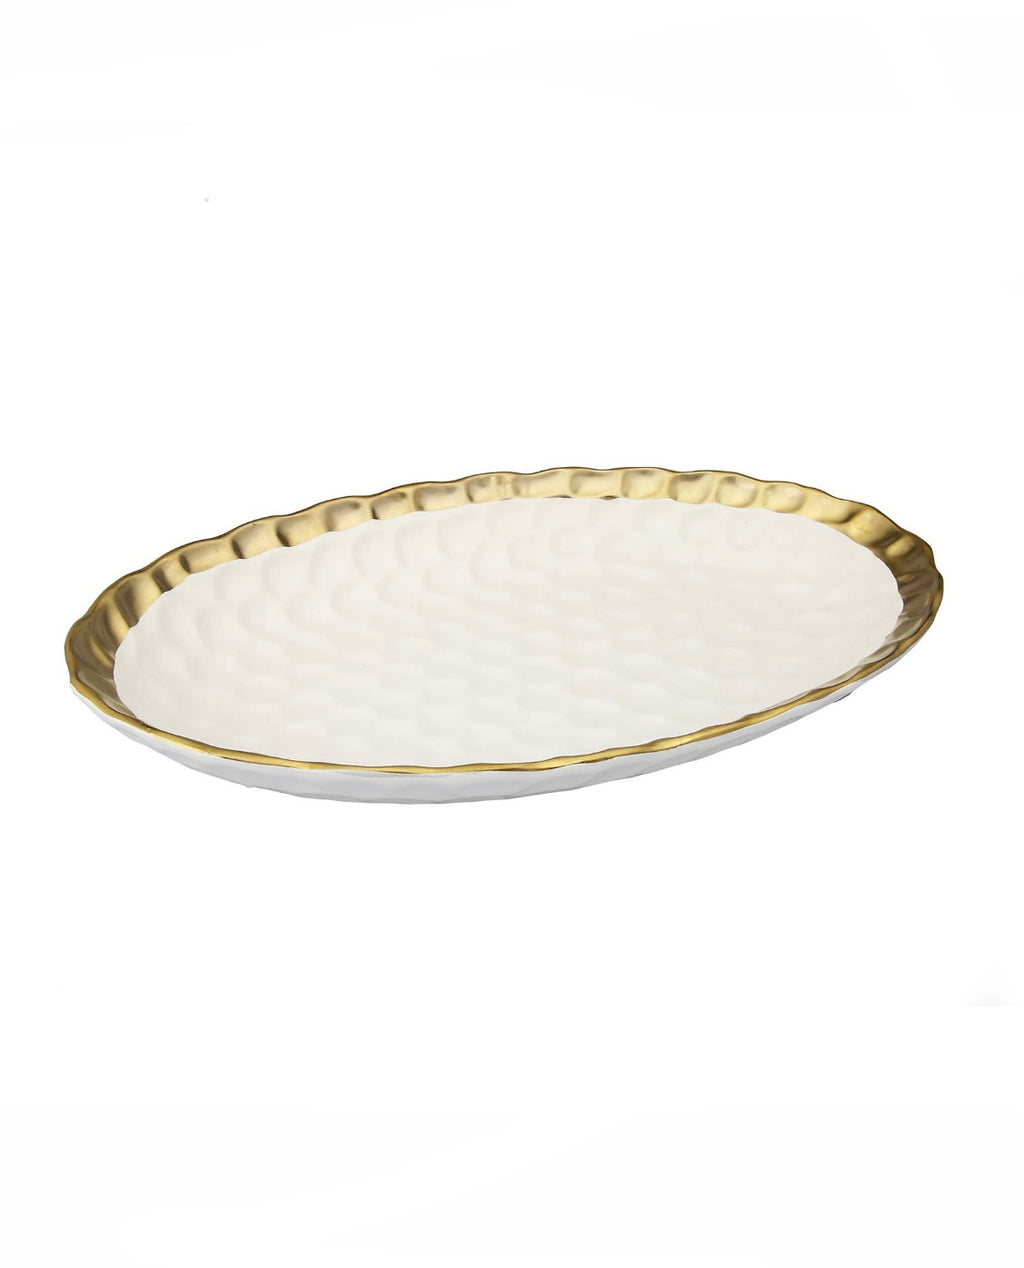 White Ceramic plate with Gold trim